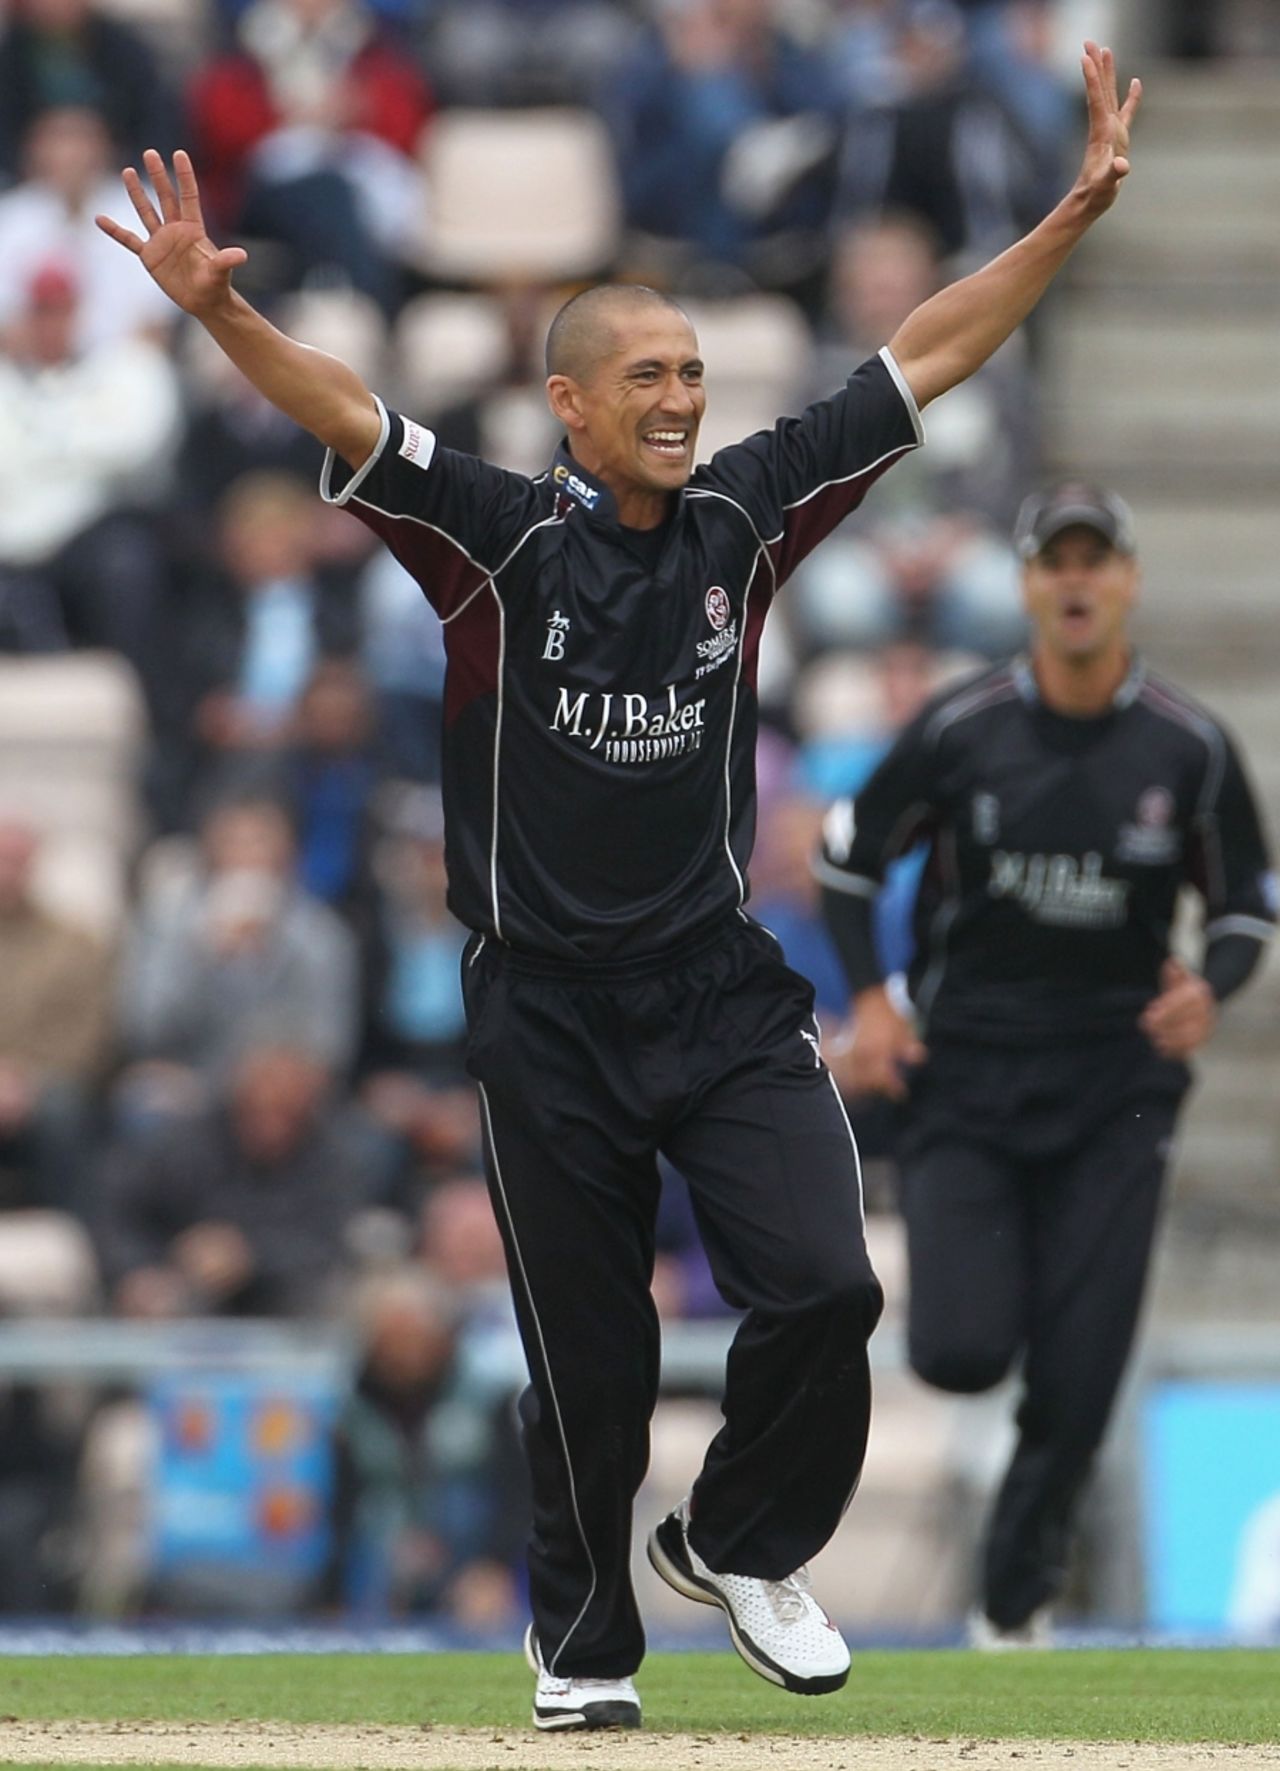 Alfonso Thomas struck twice in an over to edge Somerset ahead as the rain loomed, Nottinghamshire v Somerset, Friends Provident t20 Semi-Final, Rose Bowl, August 14 2010